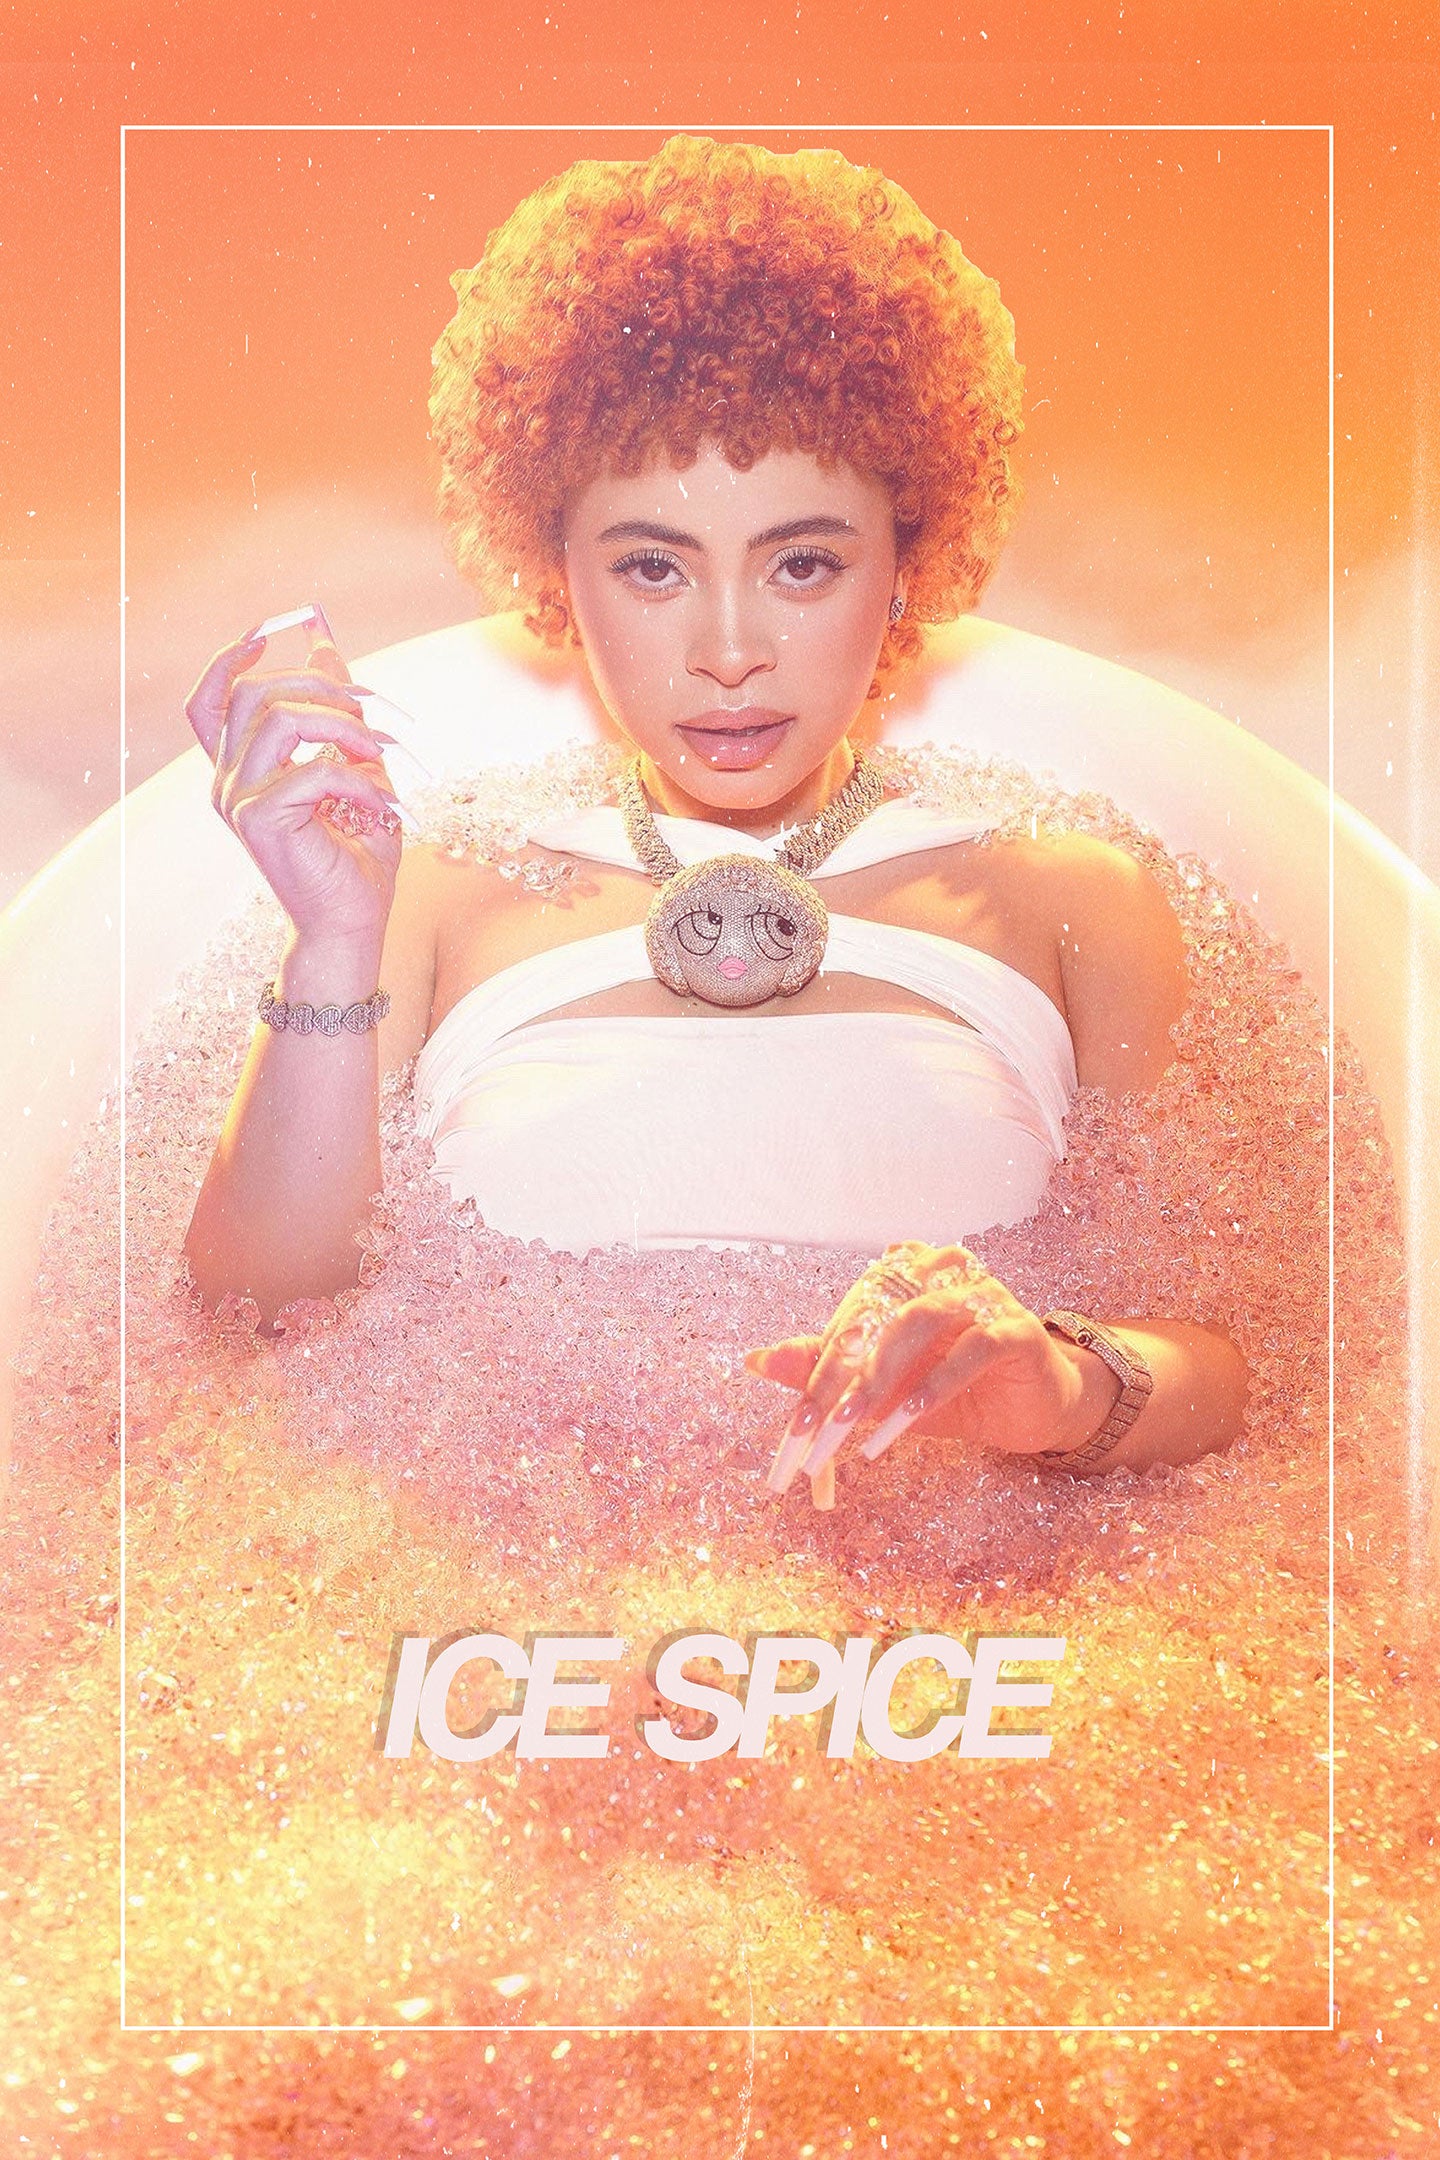 Ice Spice Shares New Single In Ha Mood